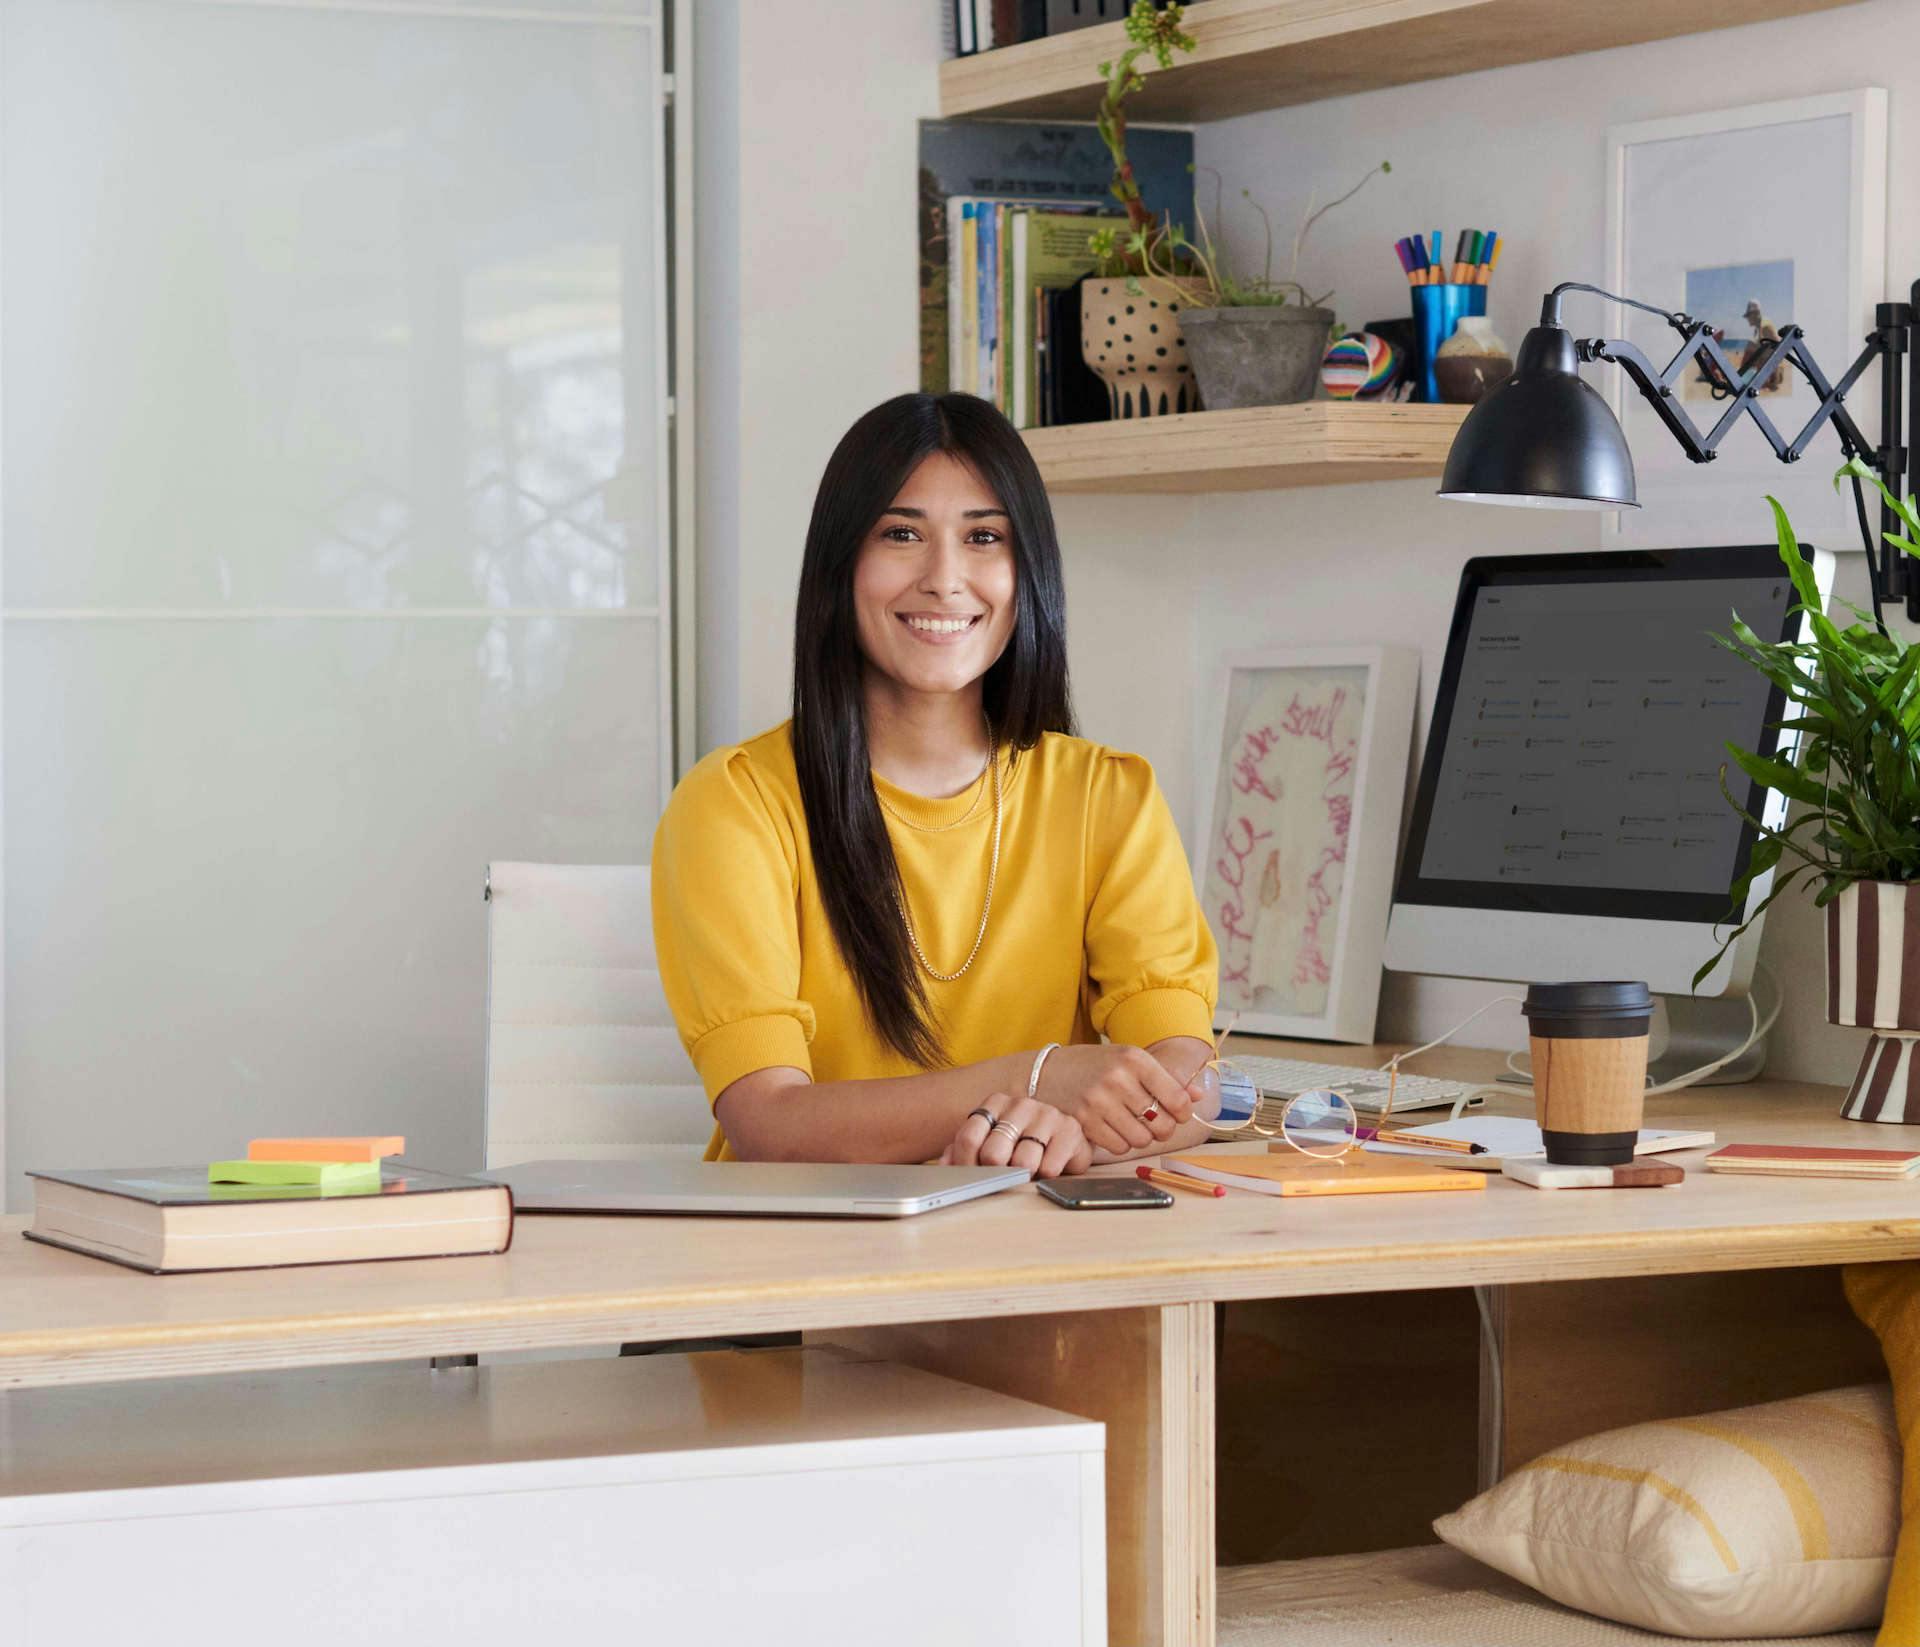 Smiling personal assistant sits at her desk